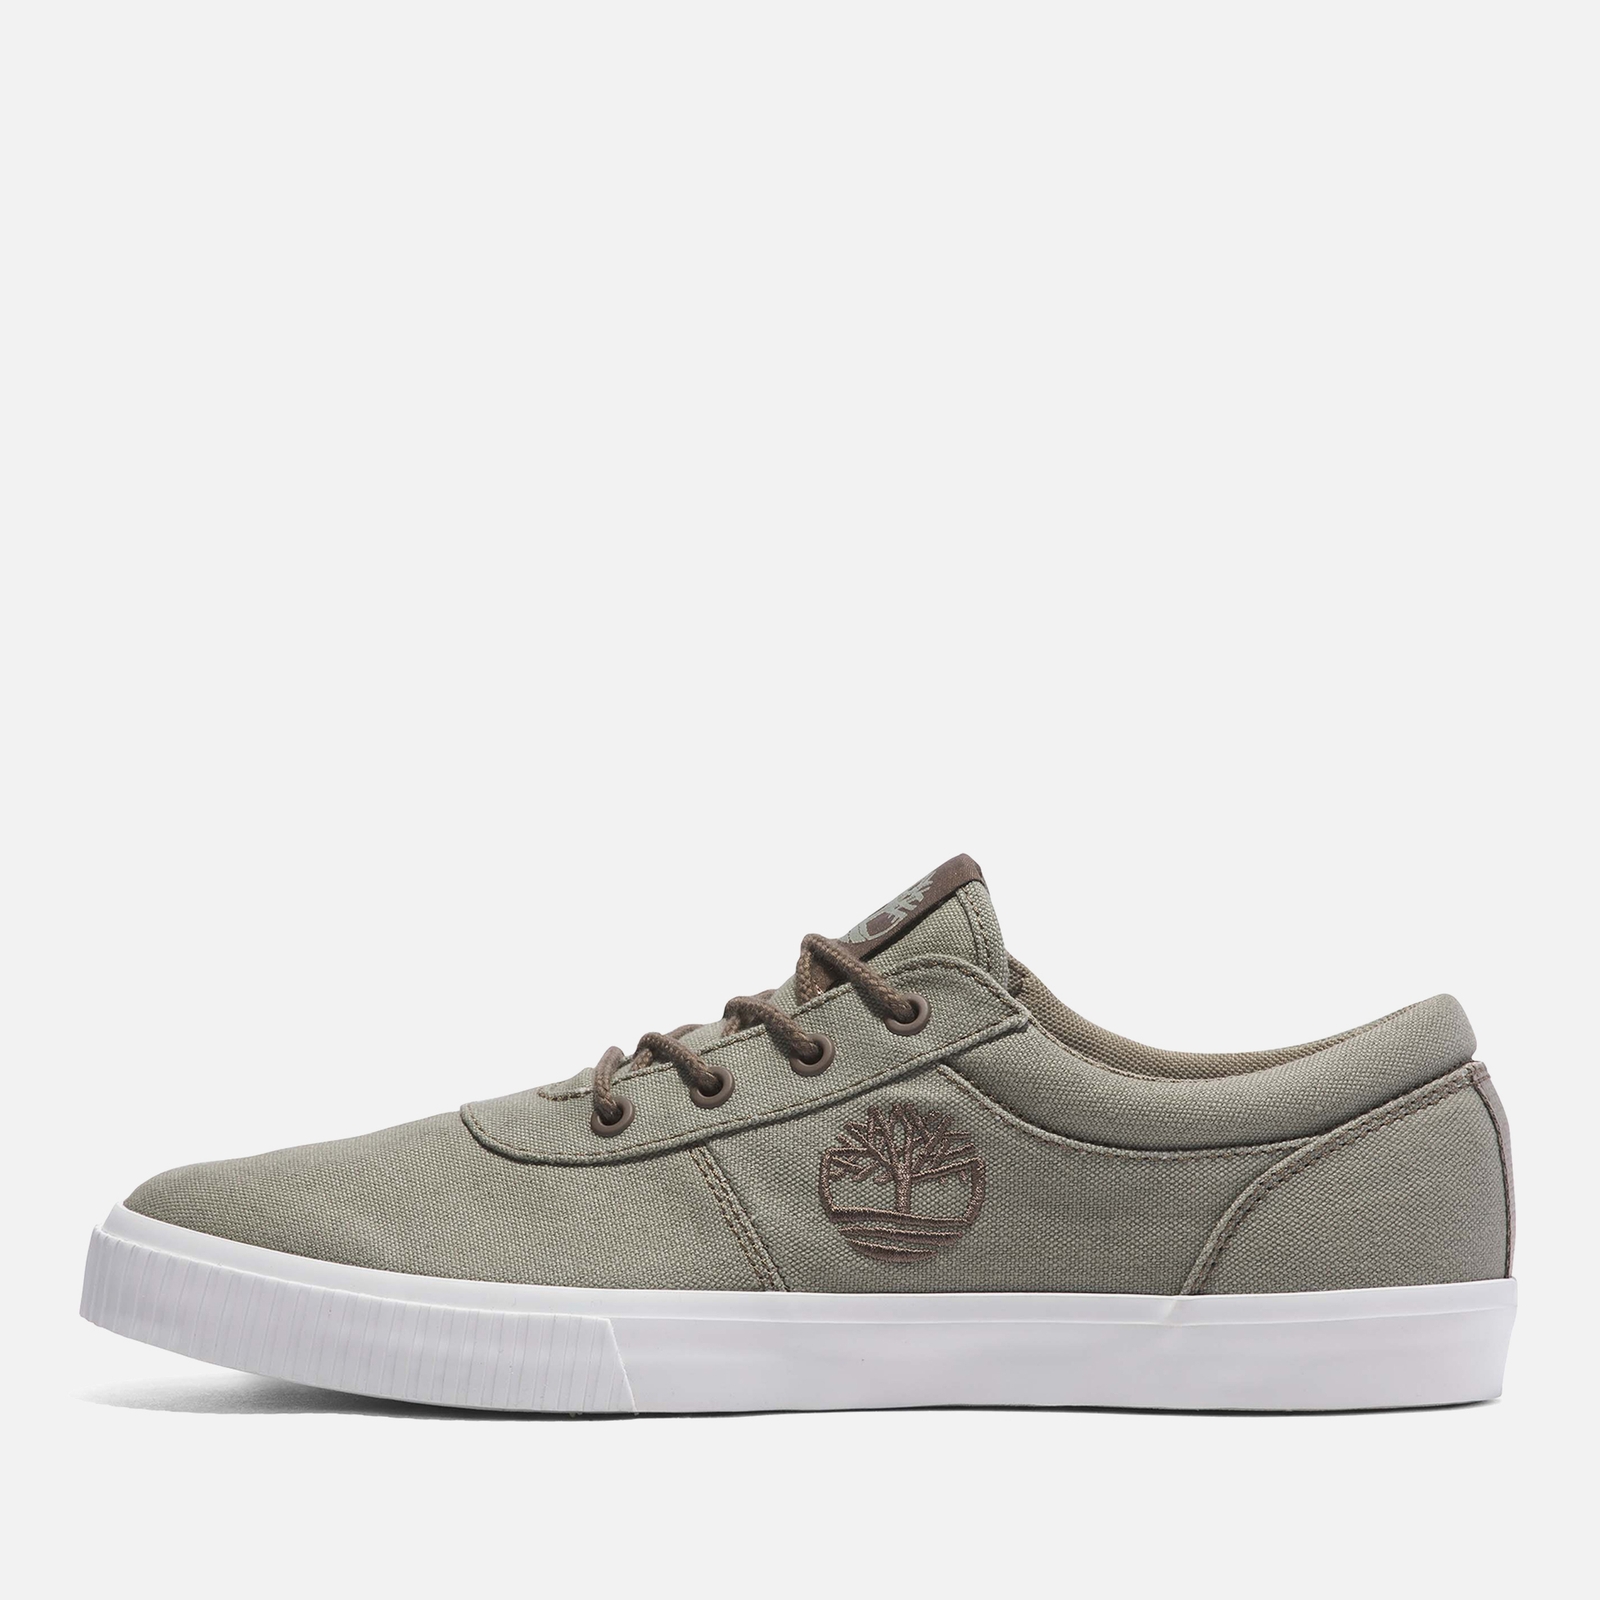 timberland men's mylo bay low top trainers - light taupe - uk 7